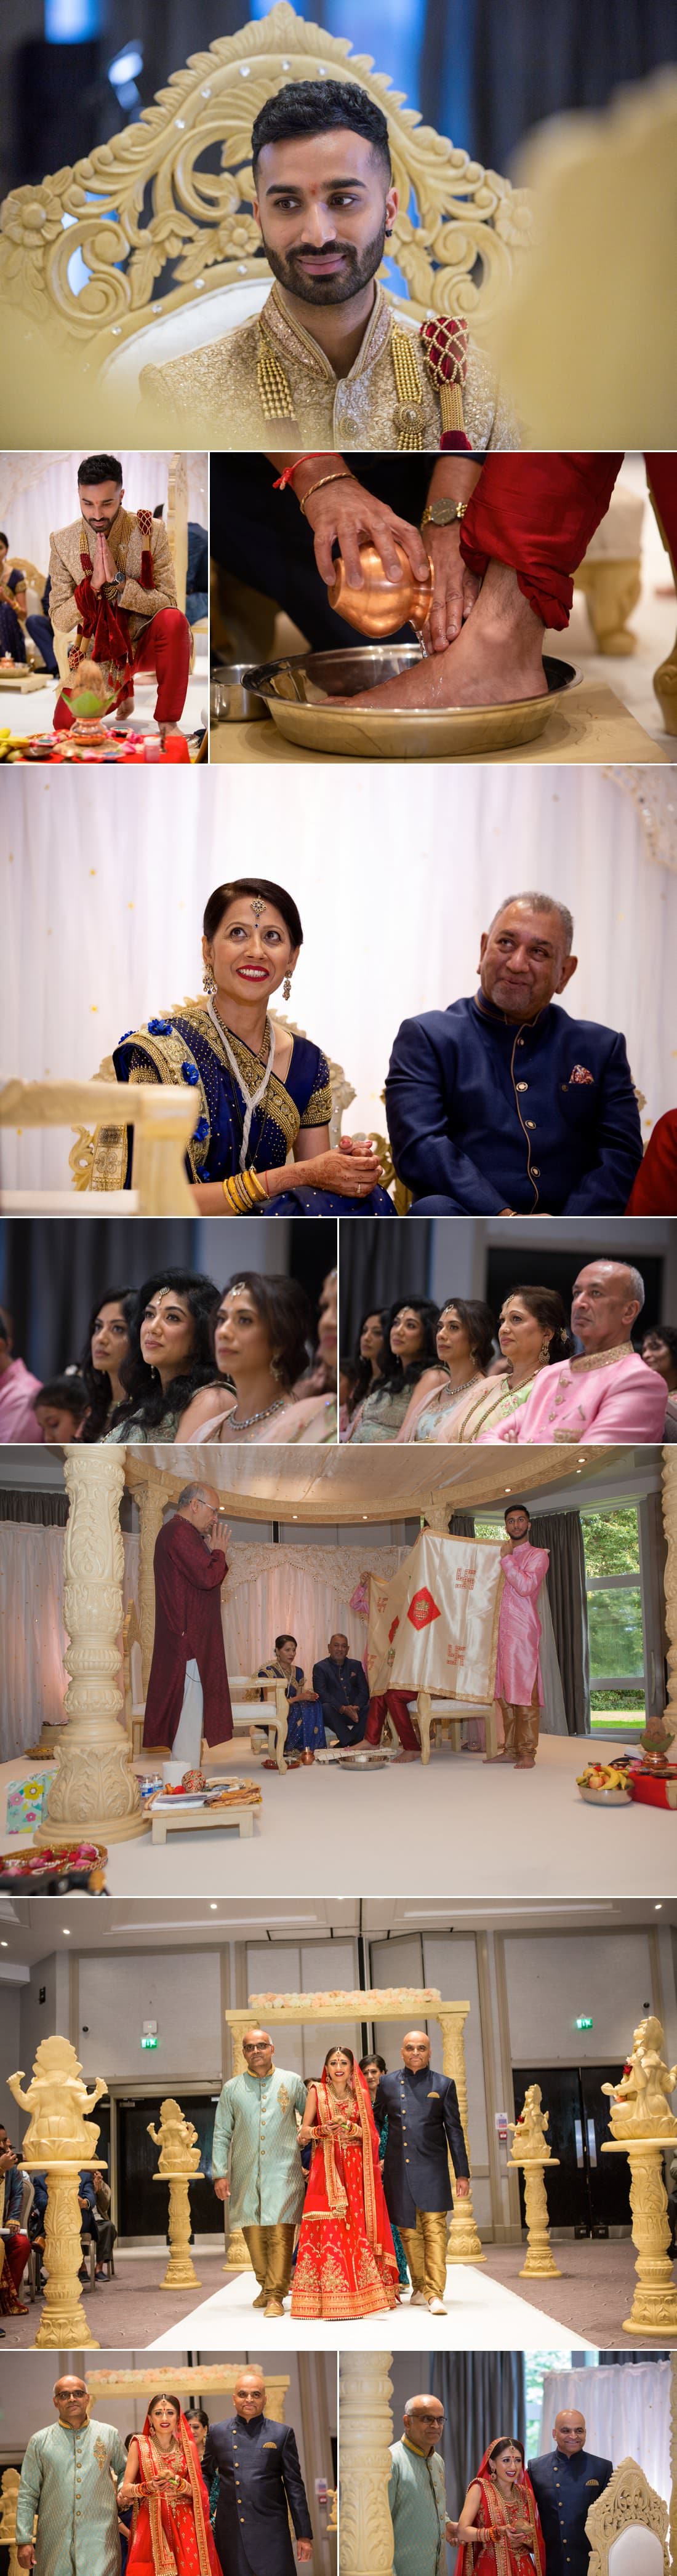 Indian wedding photography at Belfry Hotel Hiren Mica 7